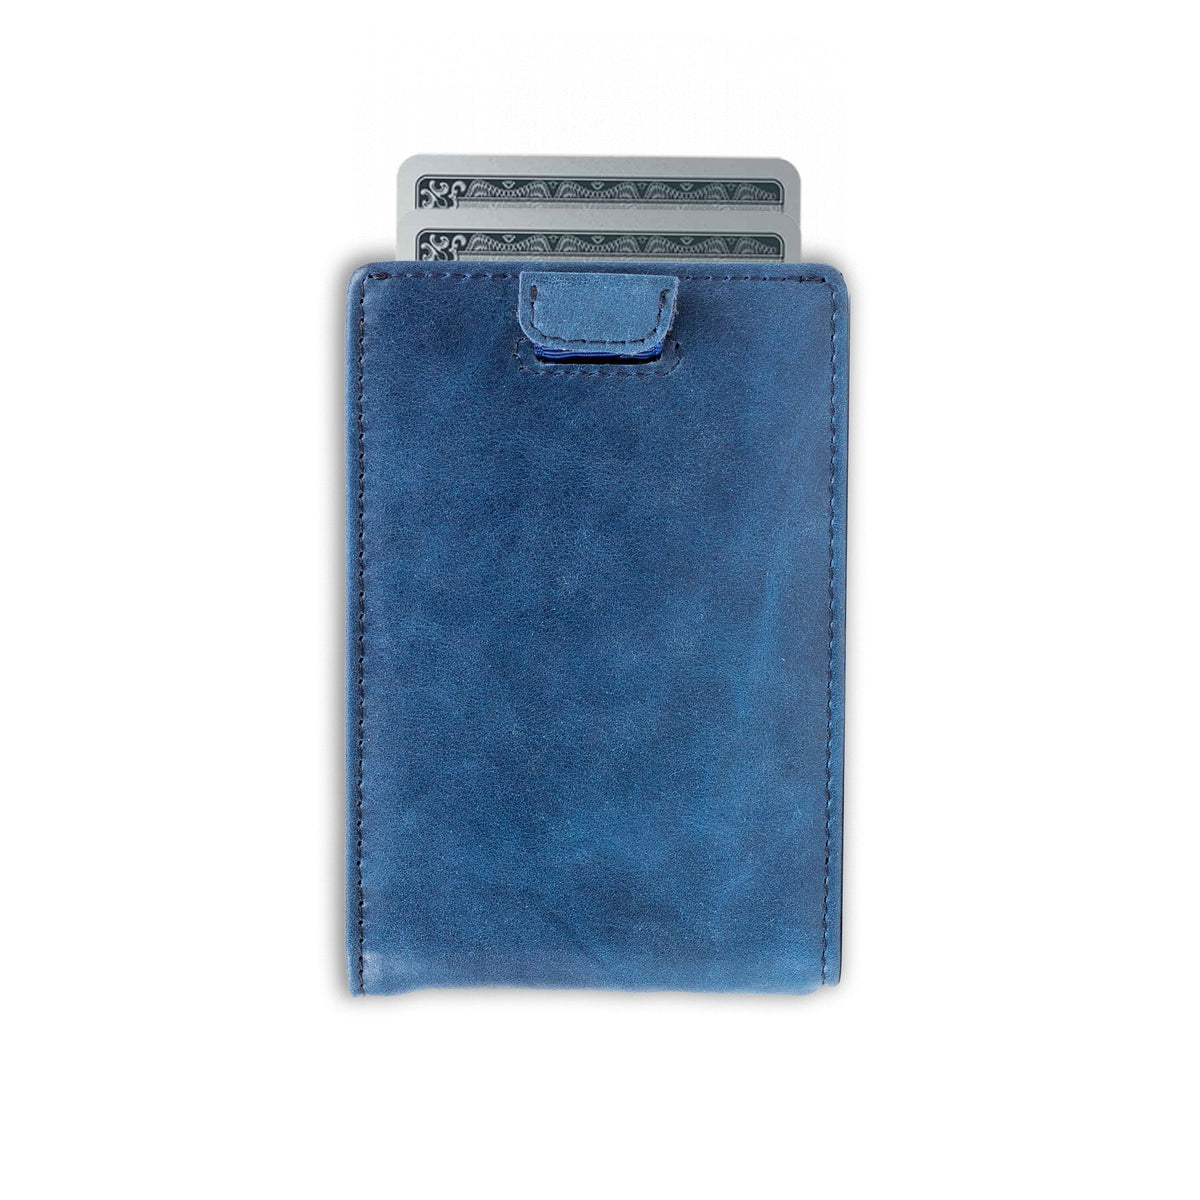  Wallet with AirTag Holder - Bifold Genuine Leather